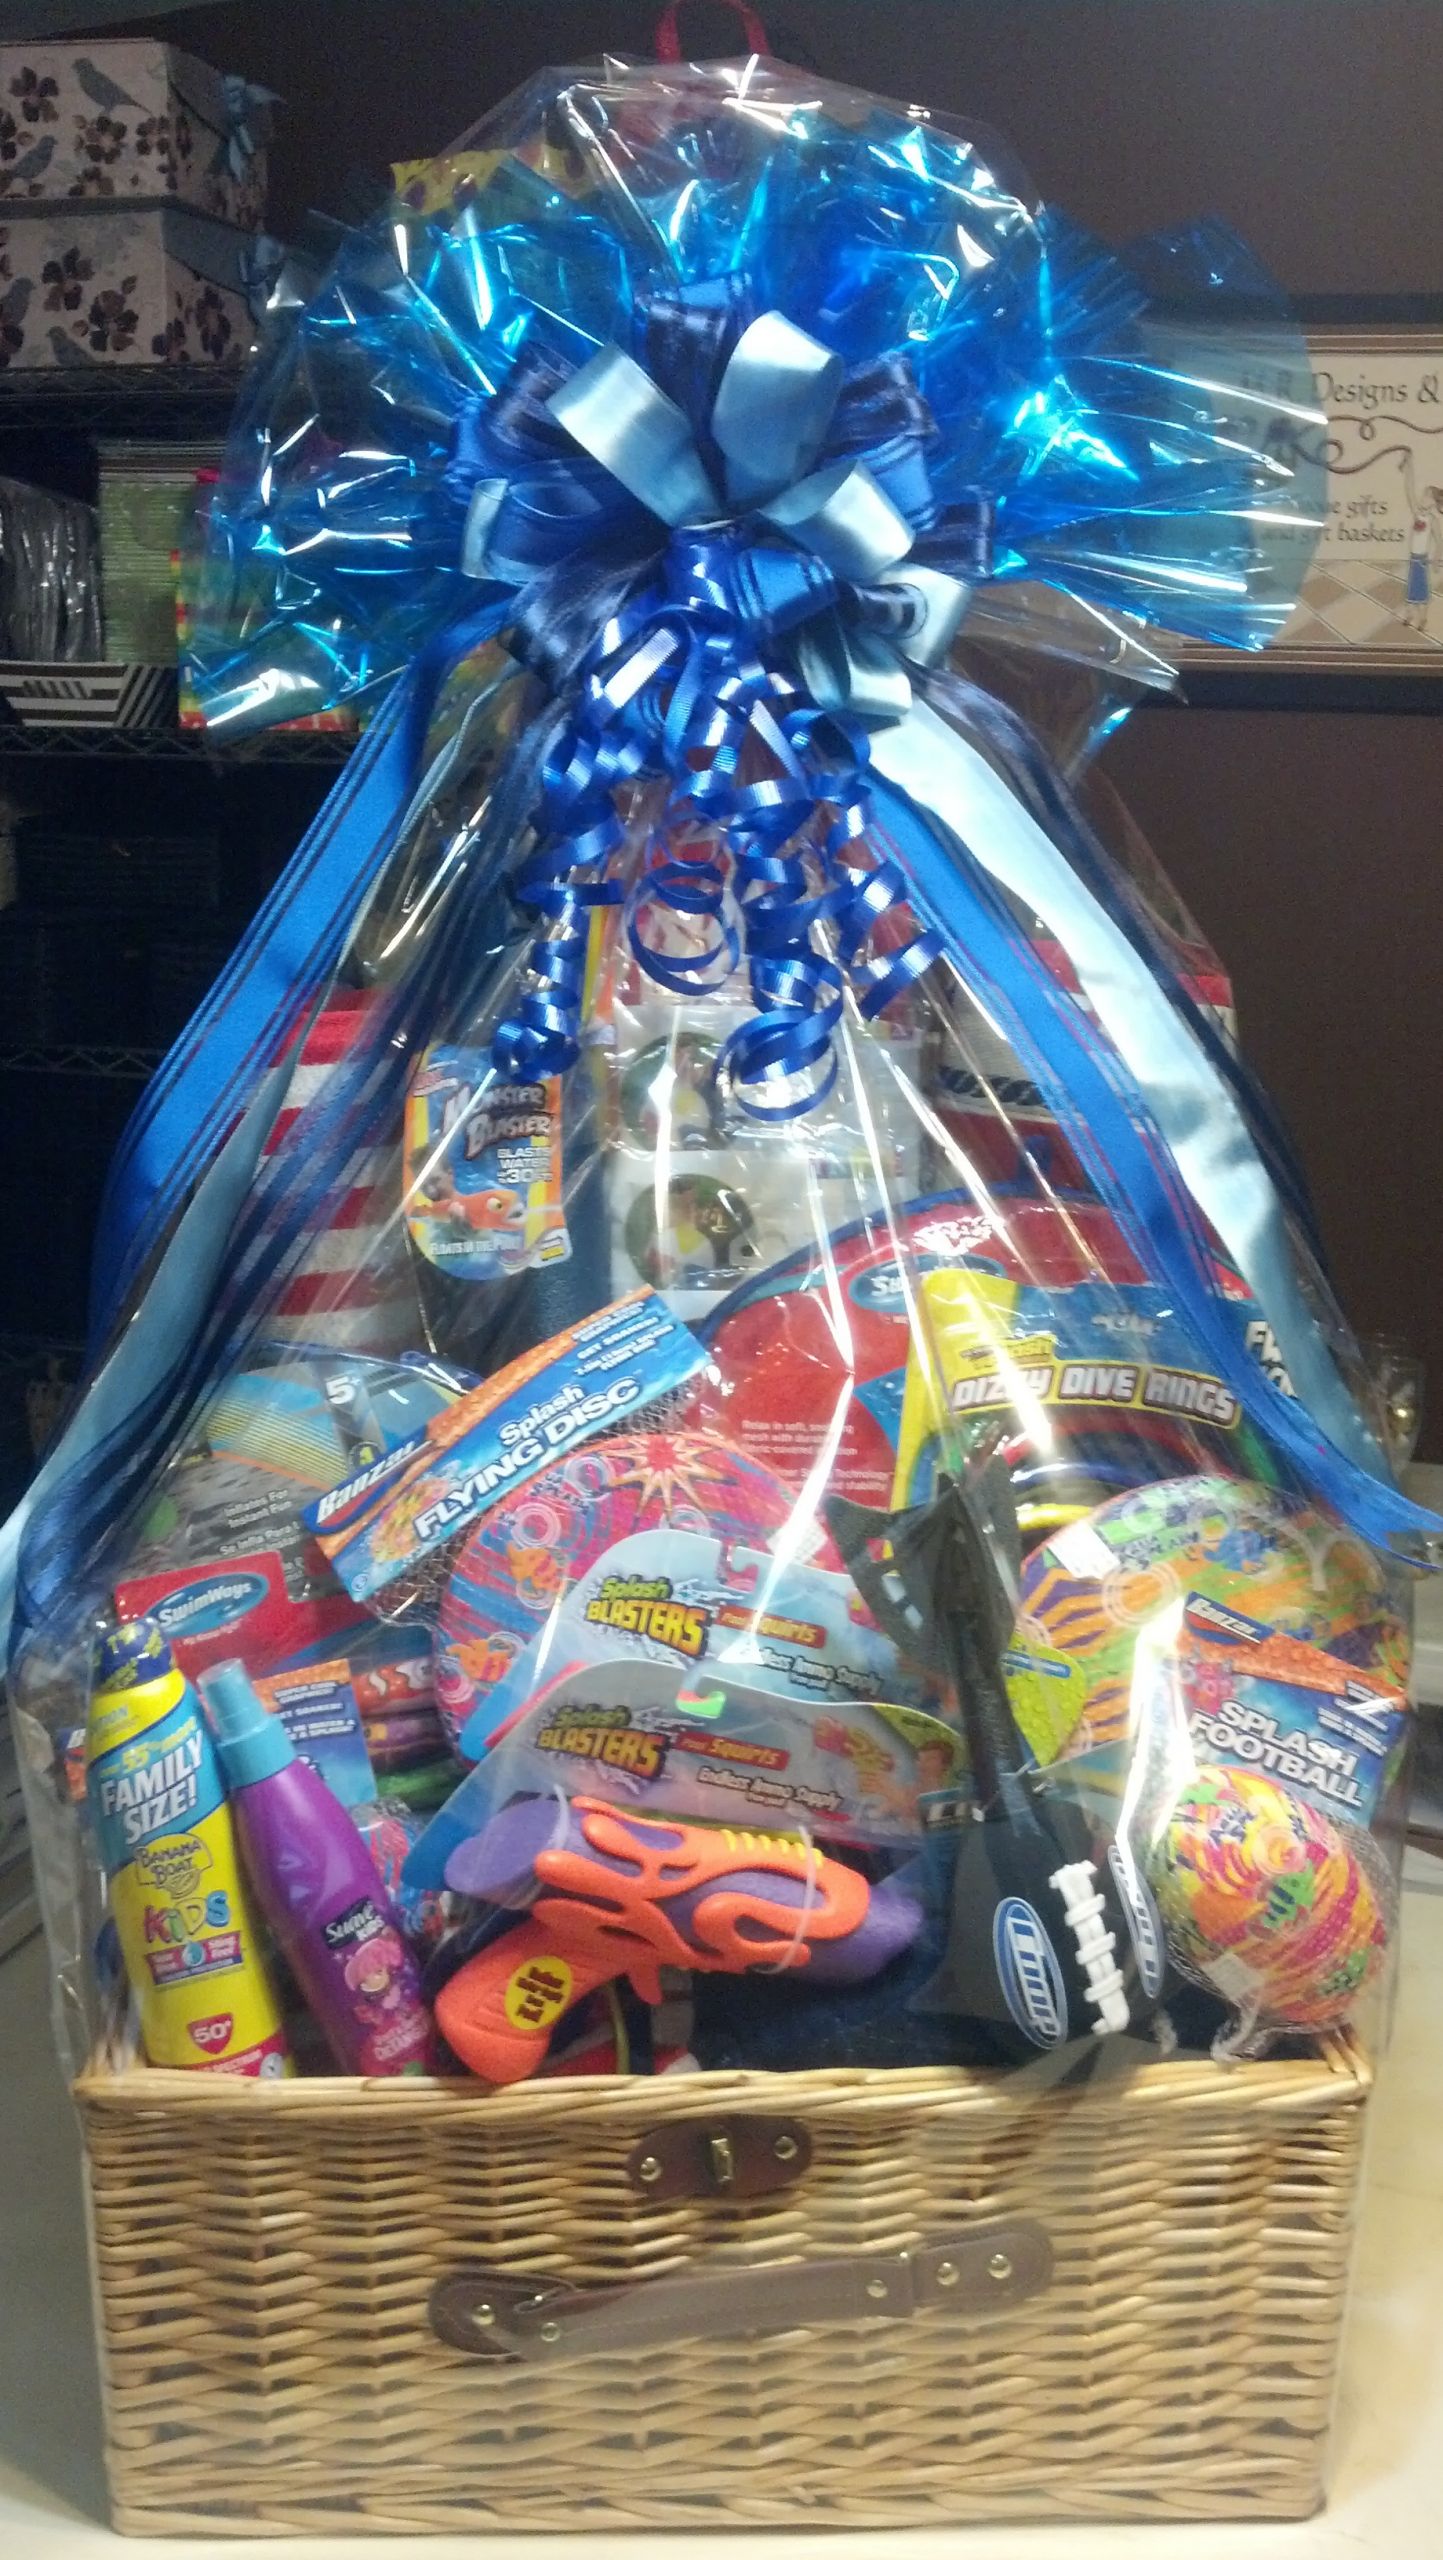 Ideas For Raffle Gift Baskets
 Special Event and Silent Auction Gift Basket Ideas by M R